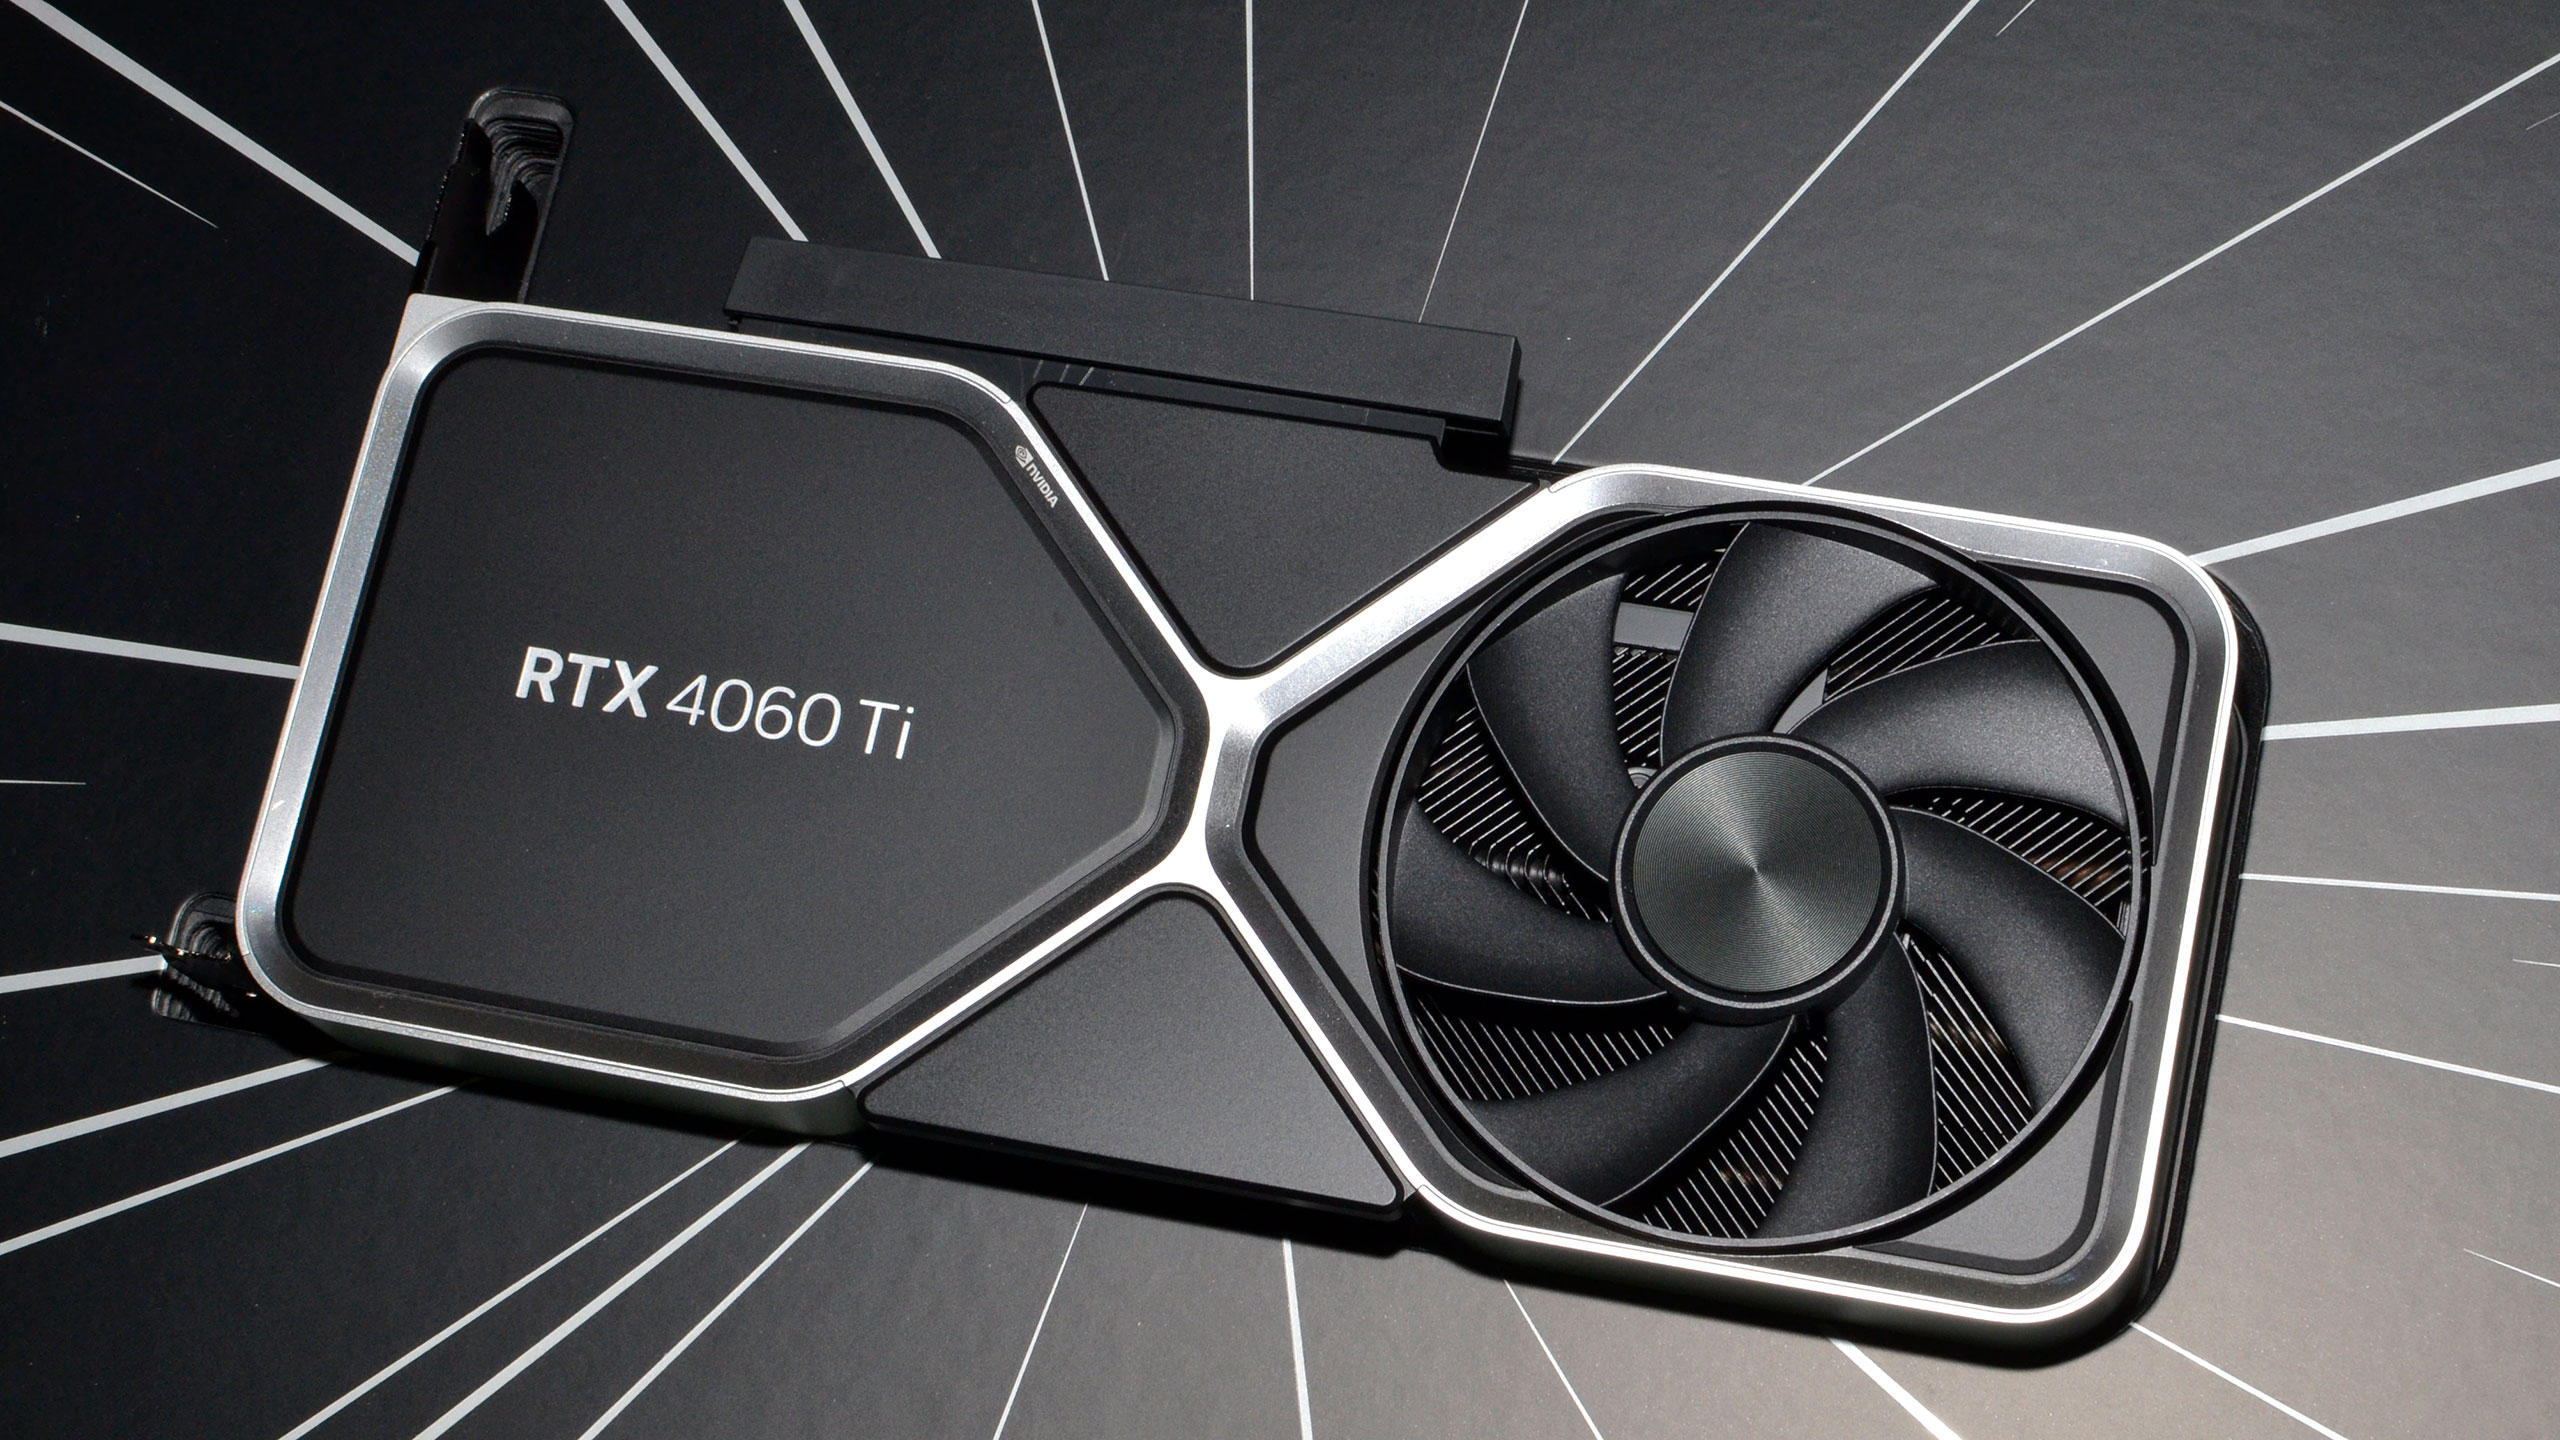 You can buy Nvidia's GeForce RTX 4060 Ti 16GB, but probably shouldn't